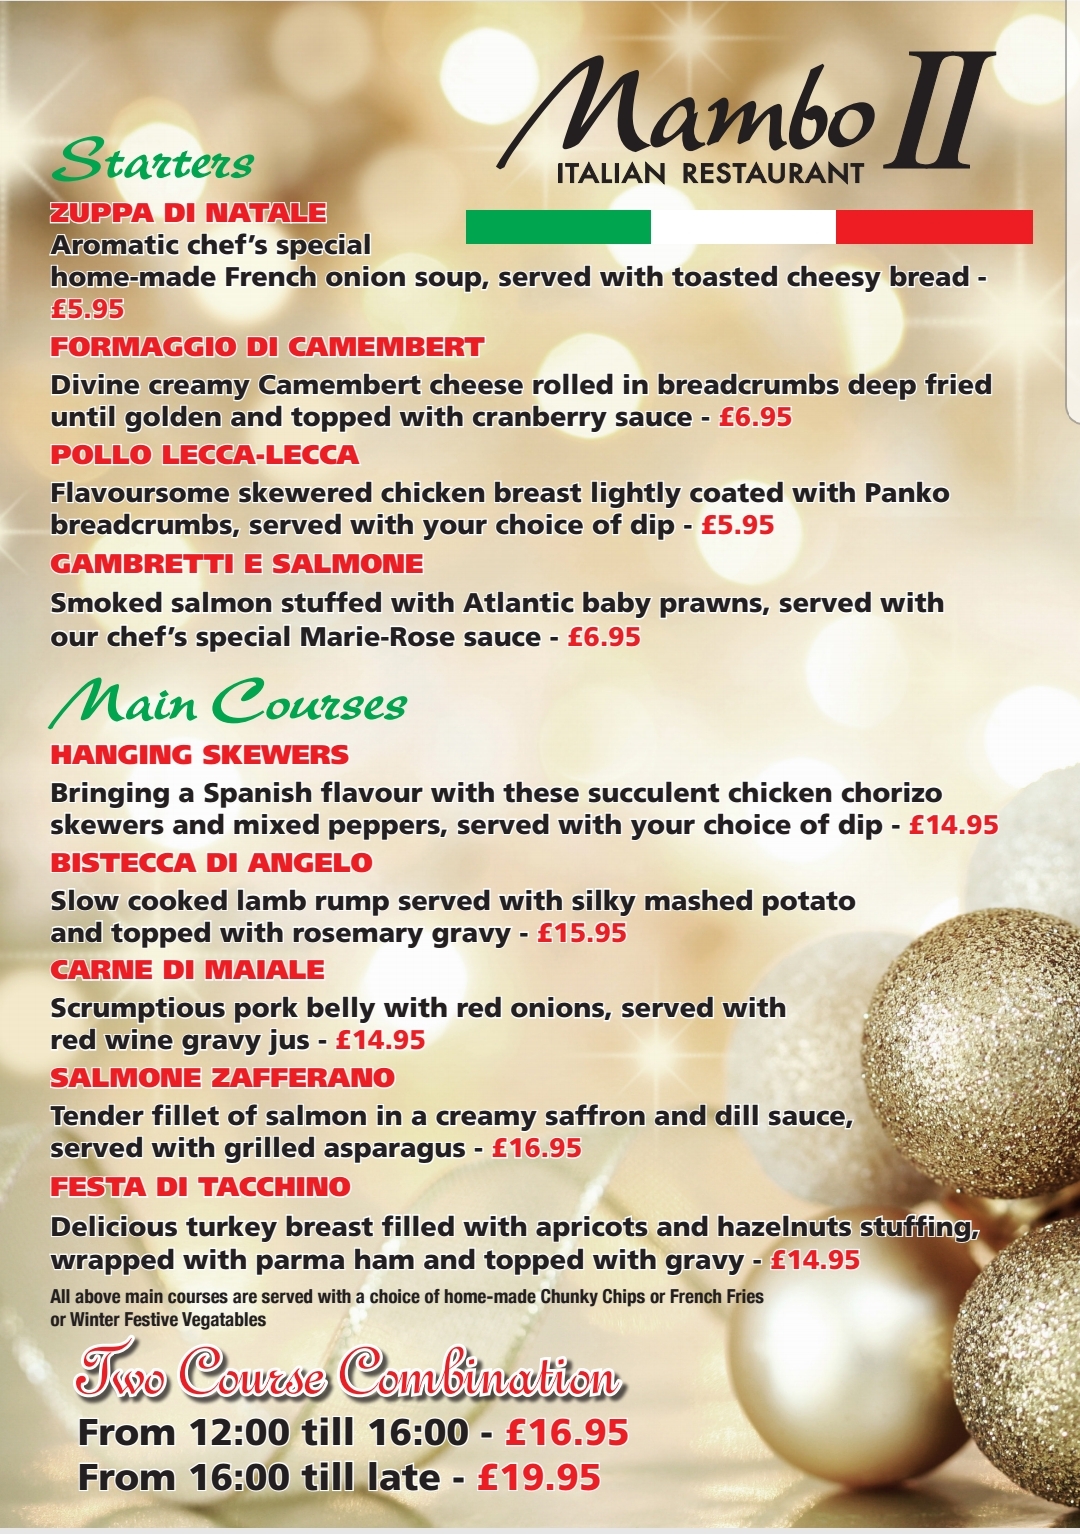 You are currently viewing Mambo II 2018 Christmas Fayre Menu